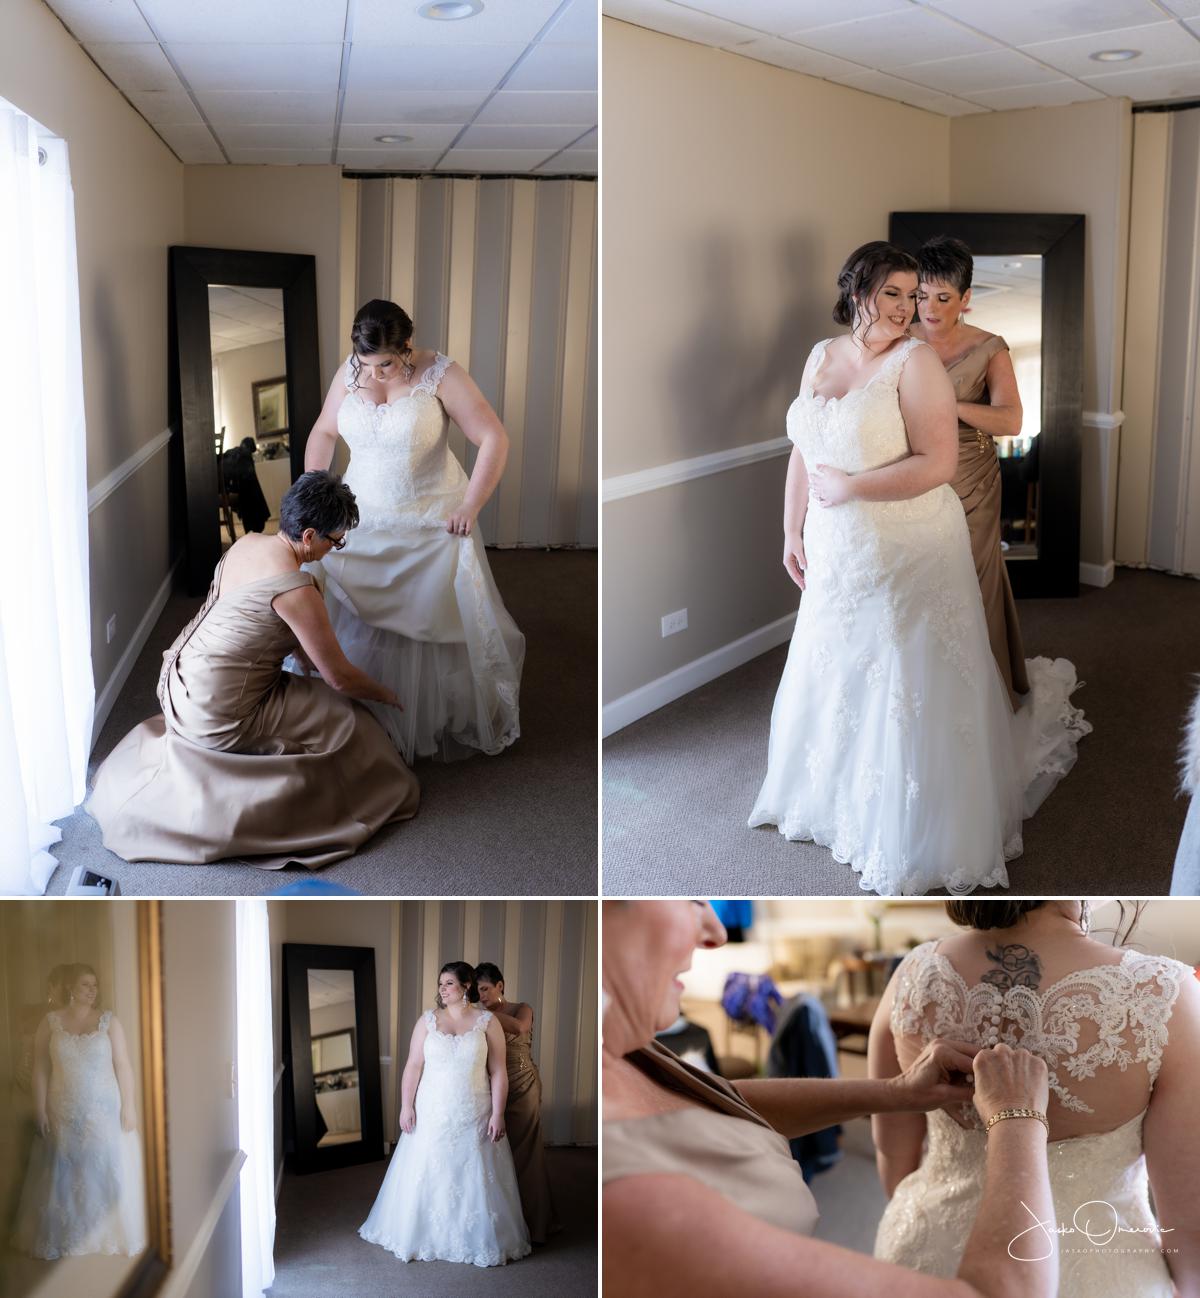 mother of the bride helping her get ready